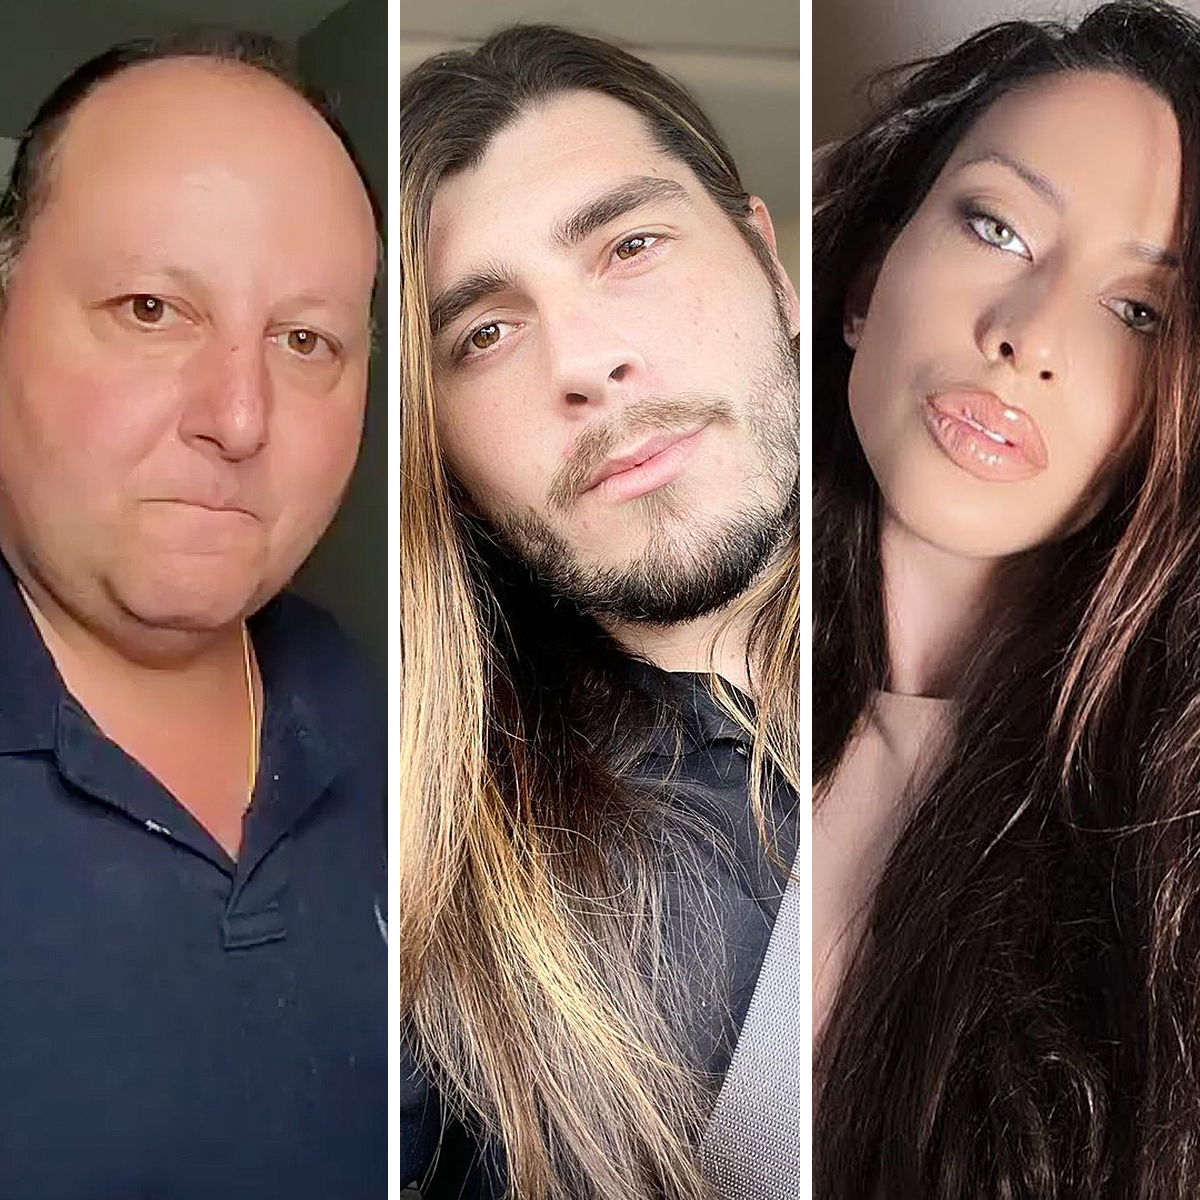 90 Day Fiance's David Doesn't Wish Ill of Andrew Amid Feud Over Amira Story Line